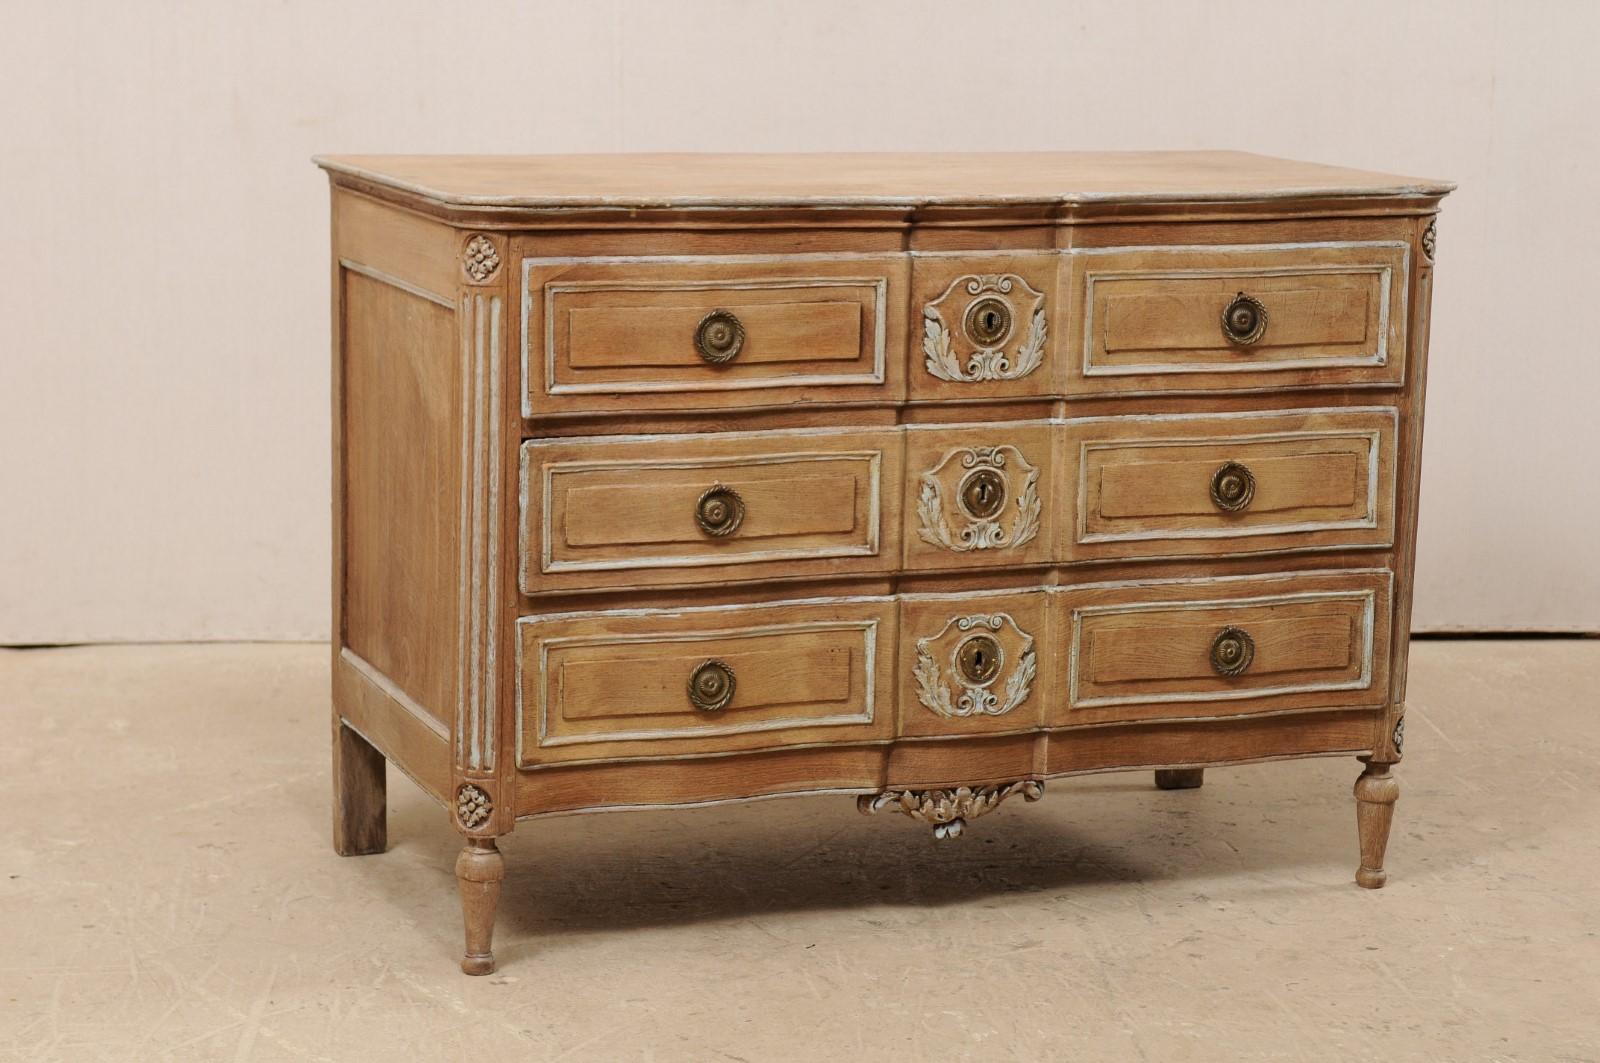 A French neoclassical carved serpentine-front chest of drawers from the 18th century. This antique commode from France features a rectangular shaped top with serpentine front lines, which mimic the movement of the case beneath. Front side posts are